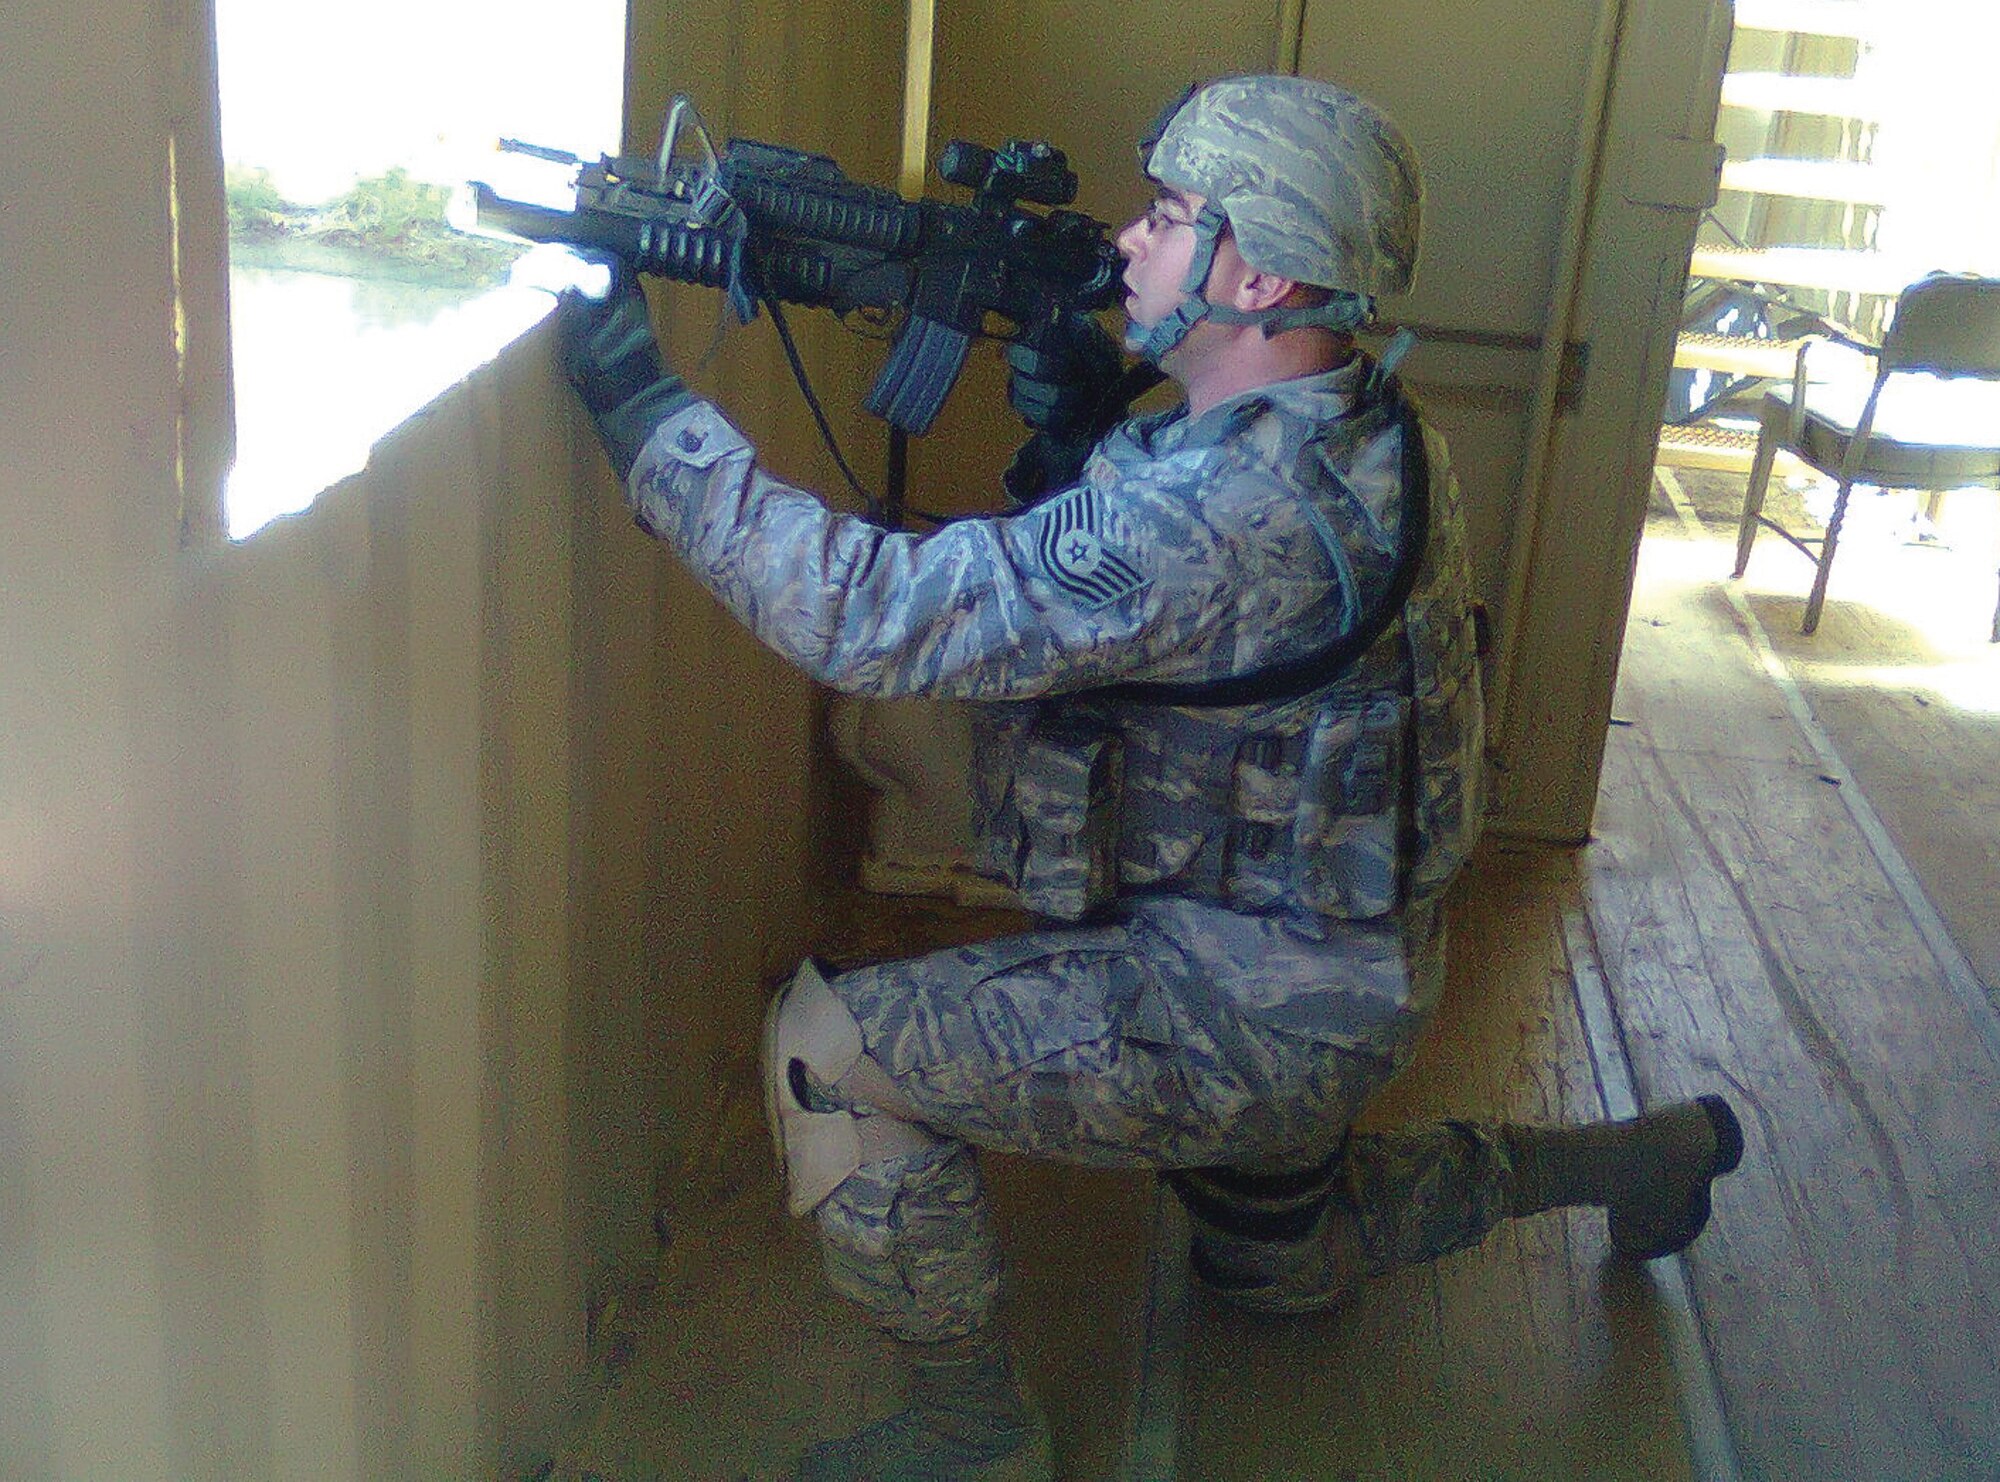 Tech. Sgt Matthew Johnson, a member of the 908th SFS, covers a window during Patriot Defender urban combat operations training in Texas.